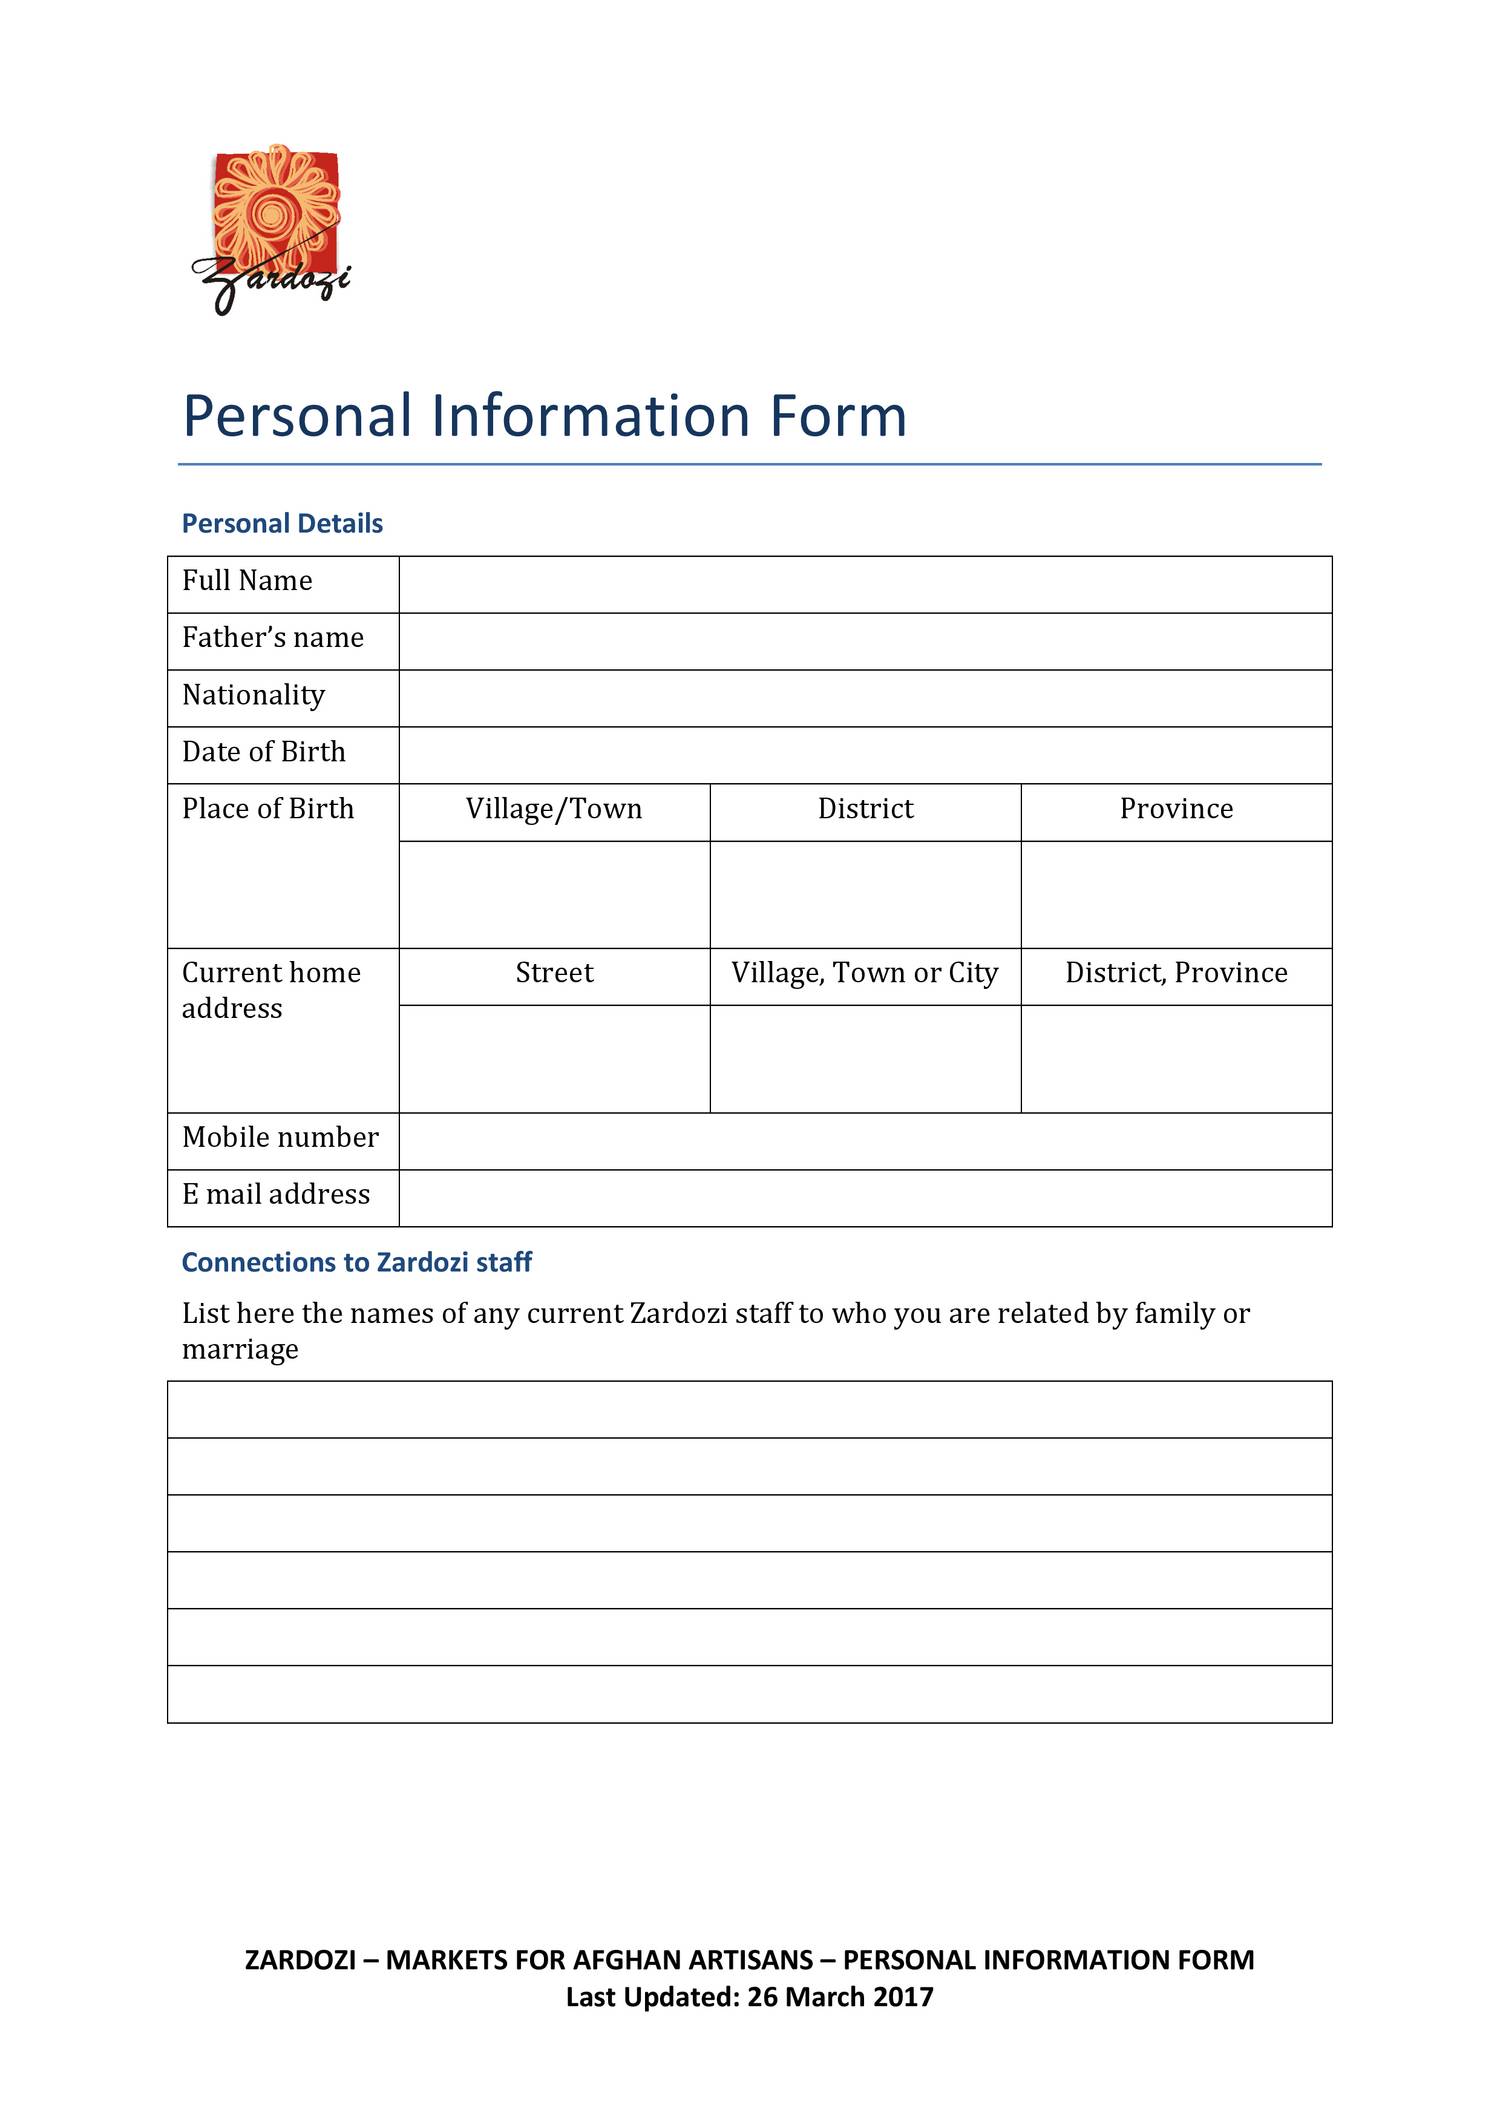 Personal forms